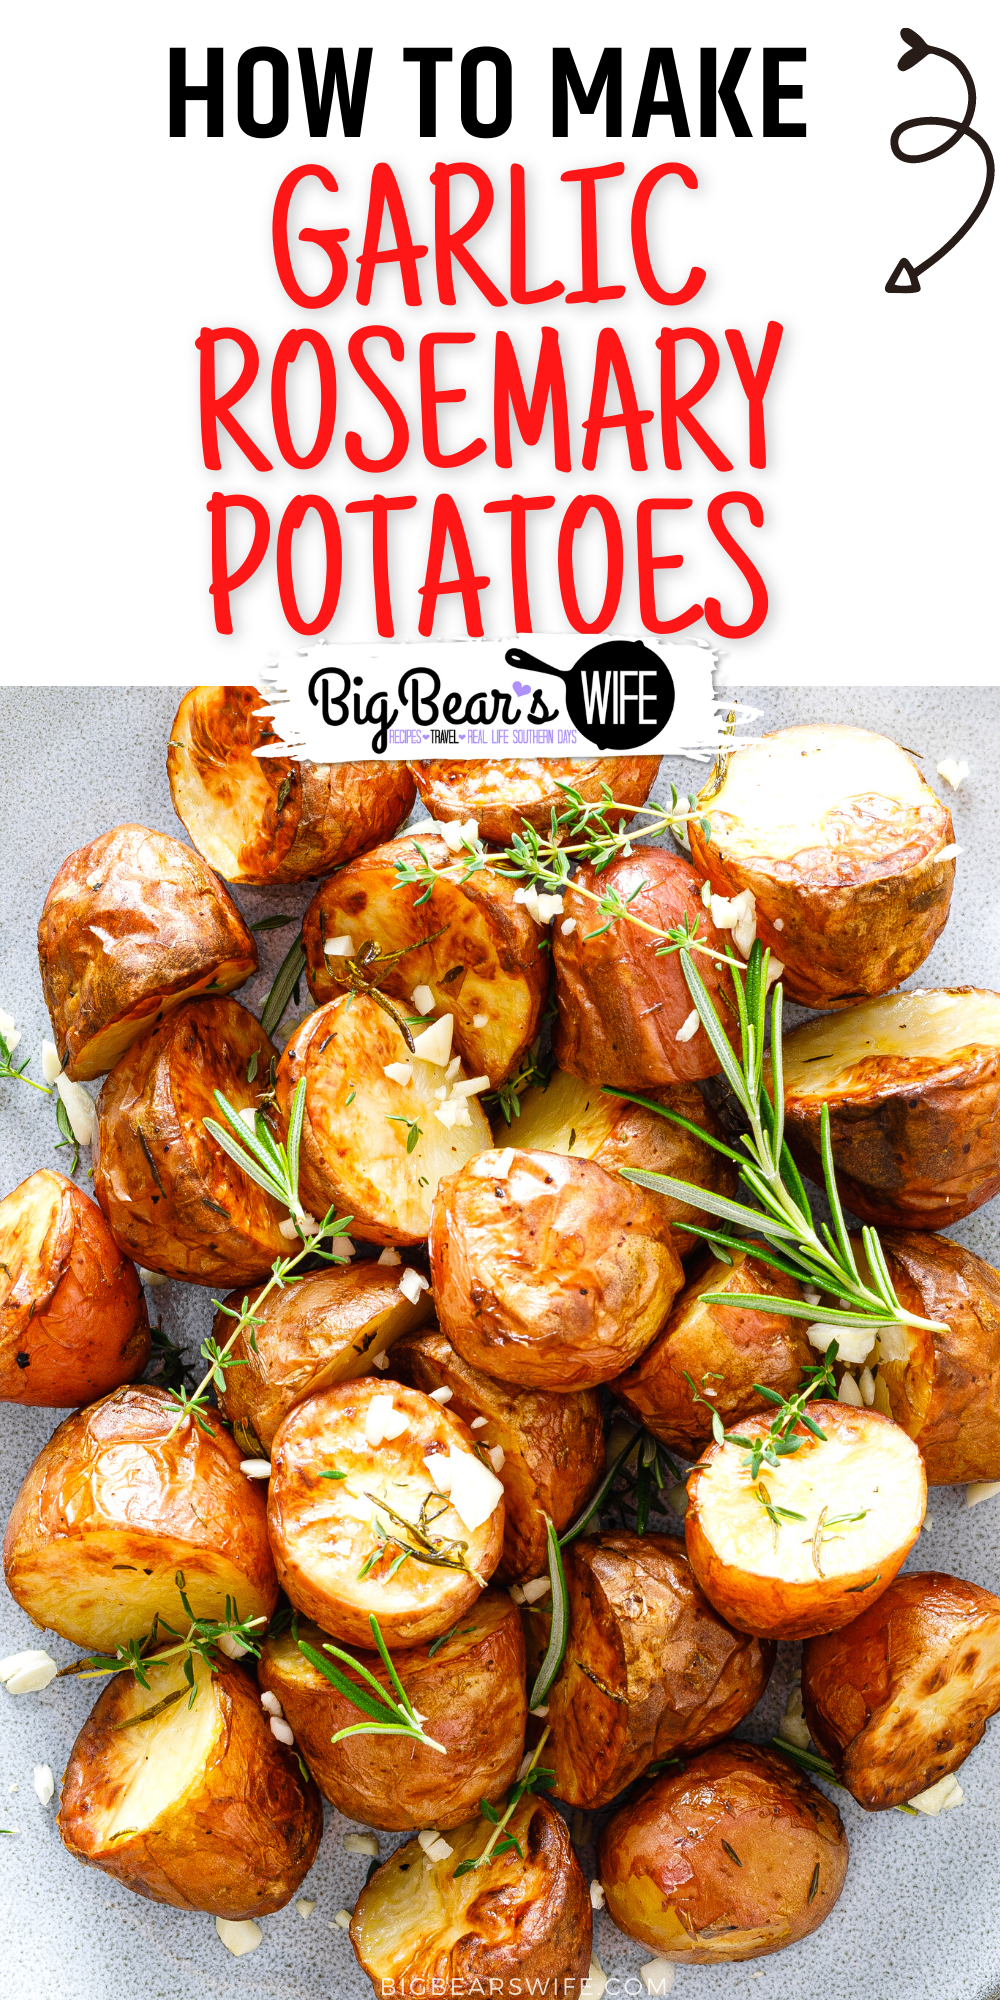 This easy Garlic Rosemary Potatoes side dish is ready in under an hour! It's great for Thanksgiving, Christmas or just as a side for a fabulous dinner any time of year! via @bigbearswife